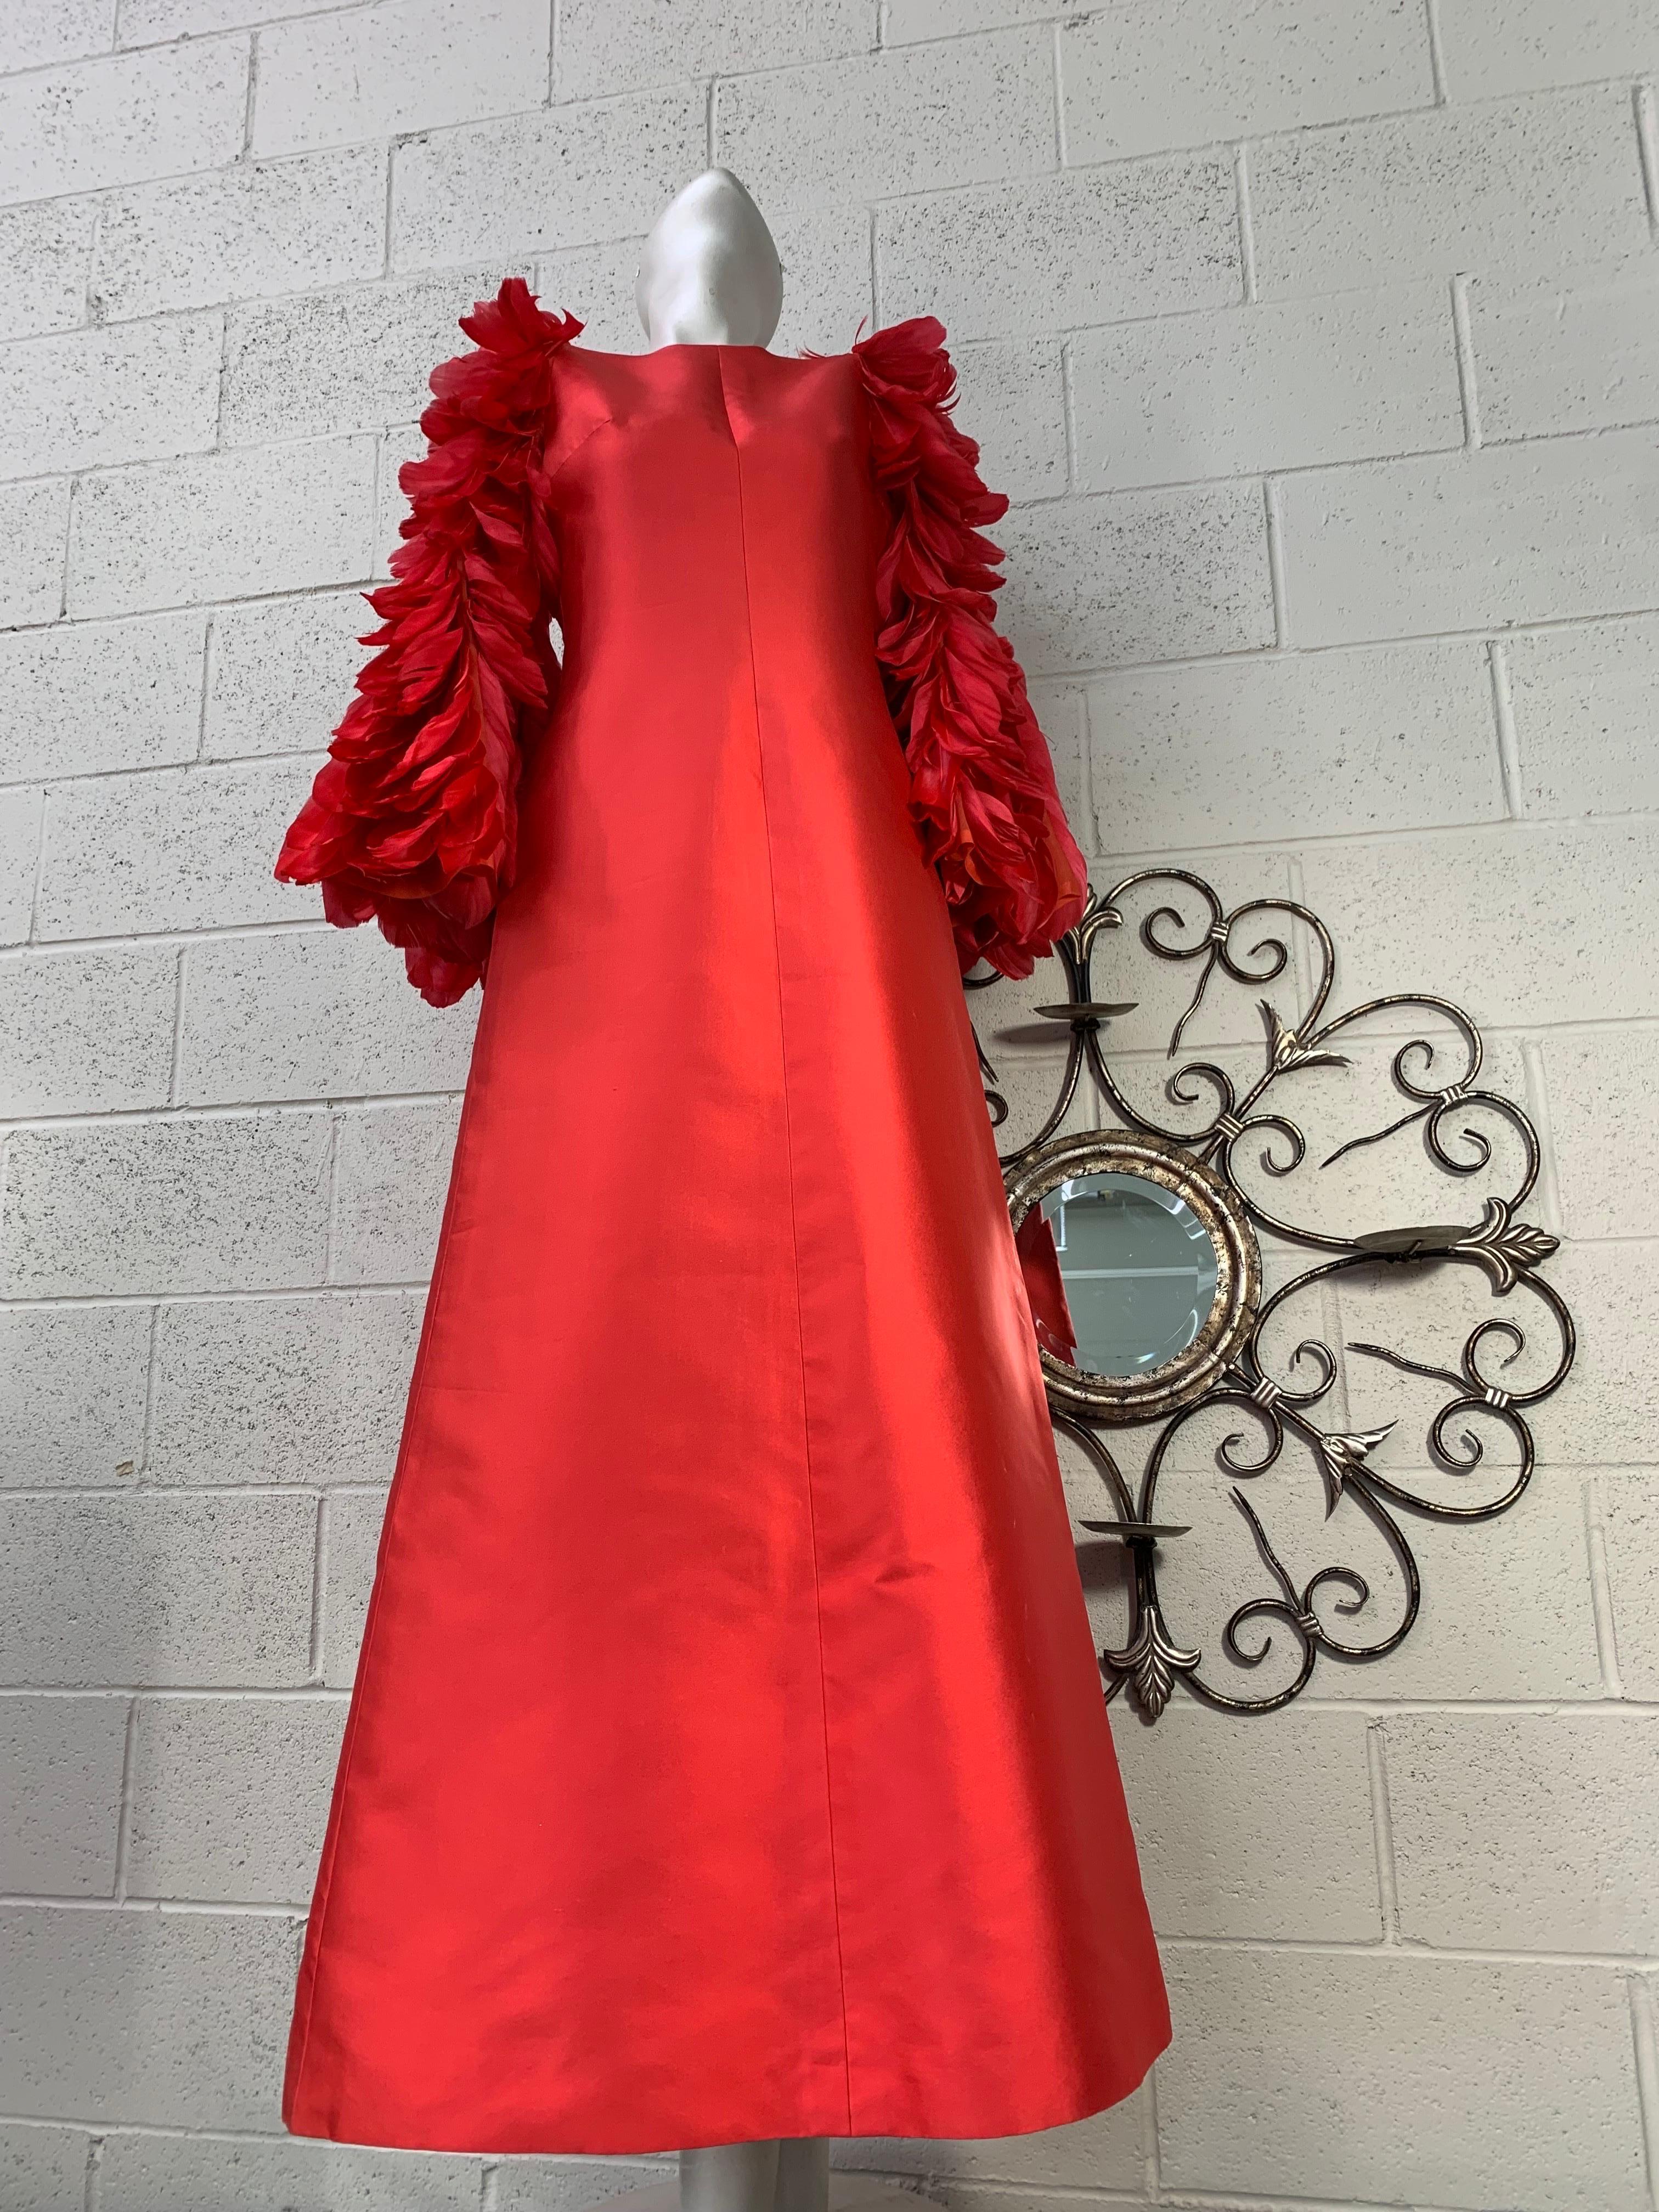 1960 Joui Schiesser Haute Couture Red Silk Gazar Gown w Feathered Bell Sleeves For Sale 2